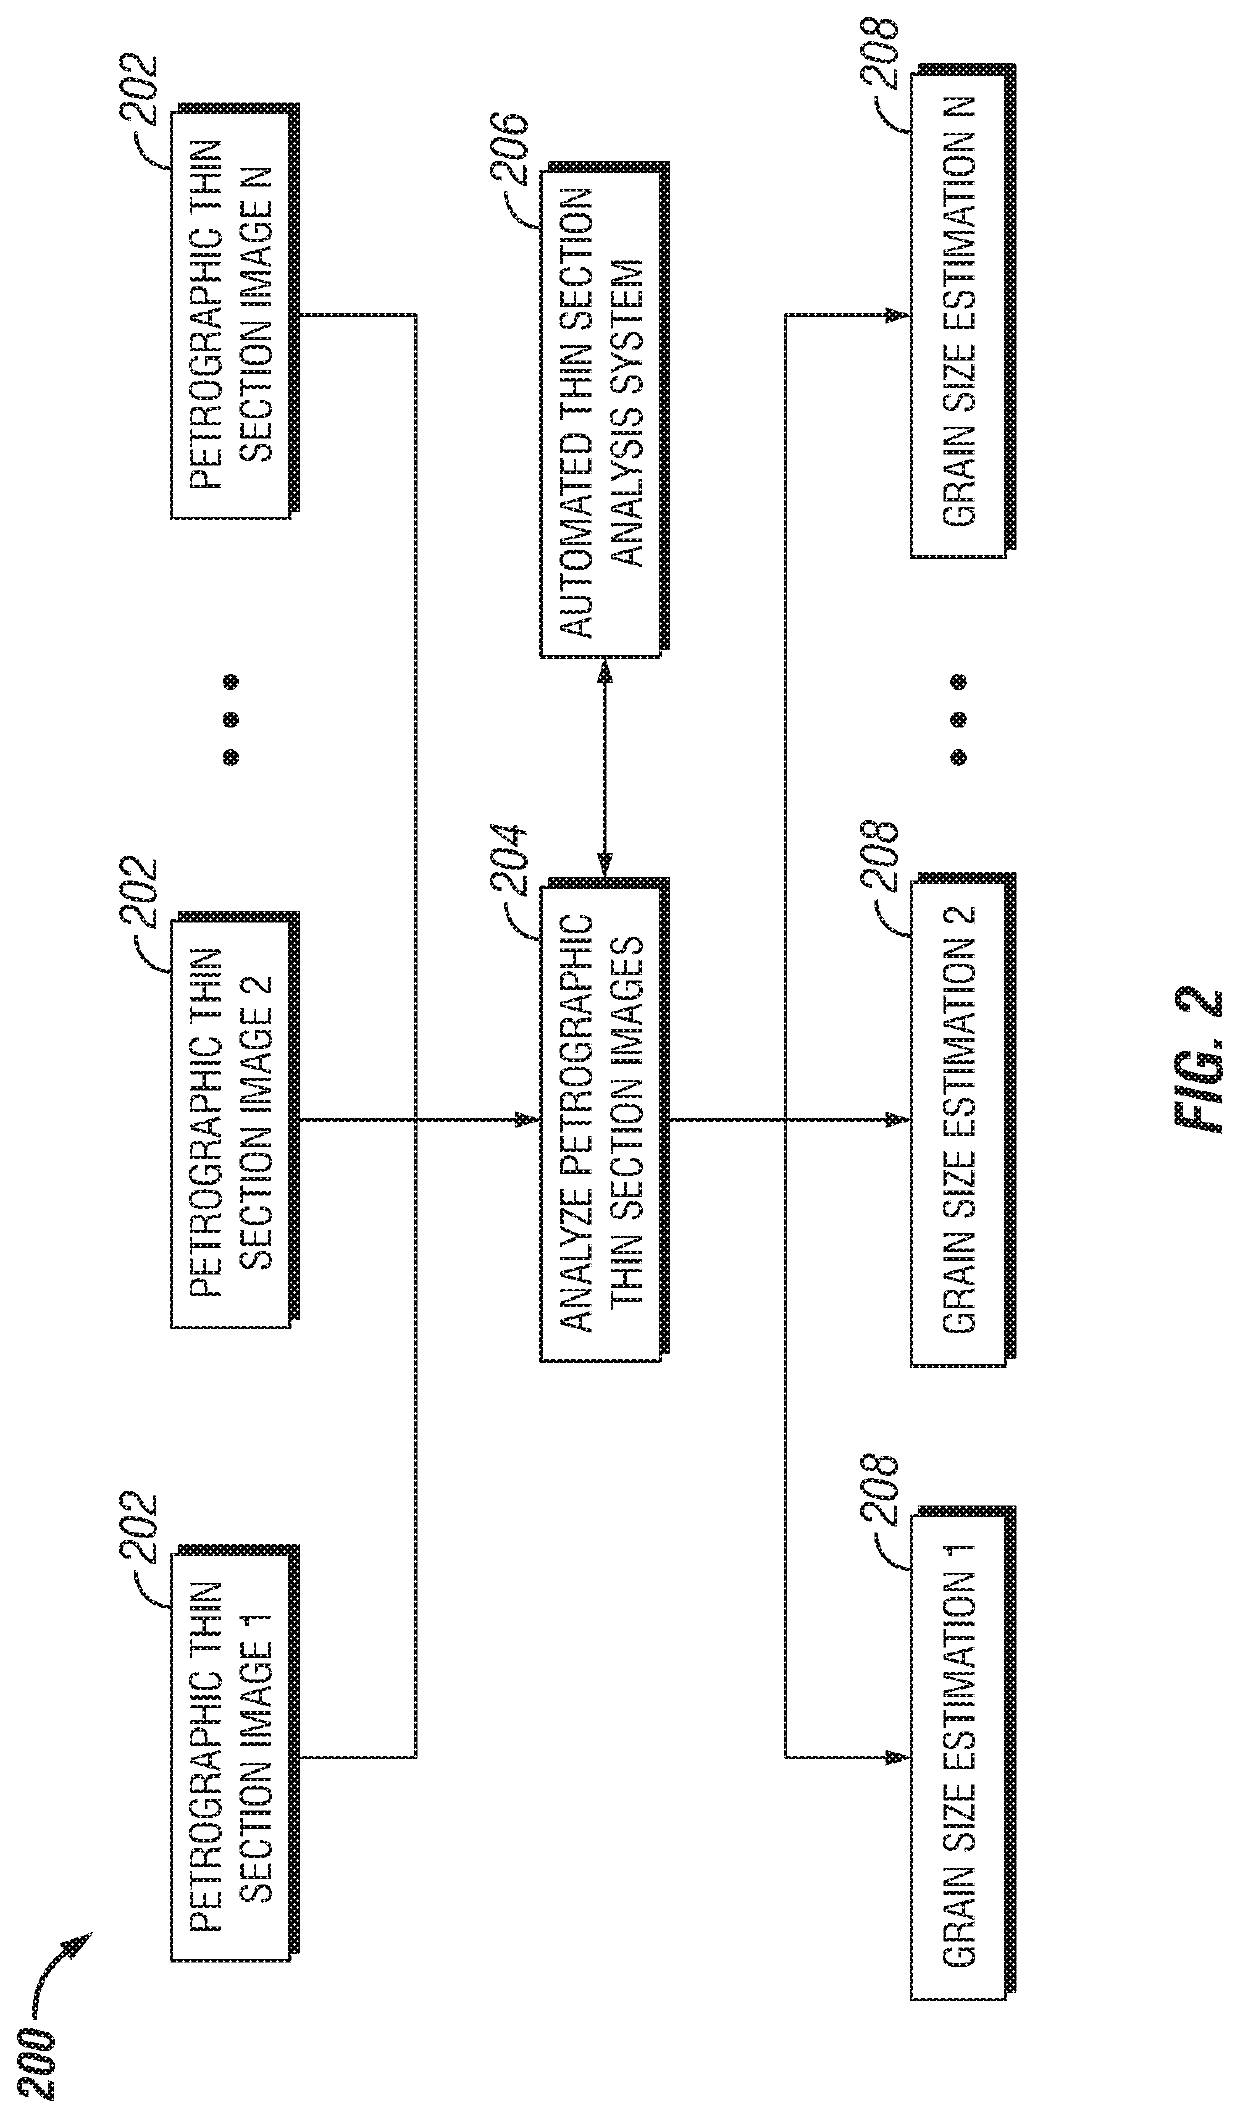 Systems and methods for generating continuous grain size logs from petrographic thin section images